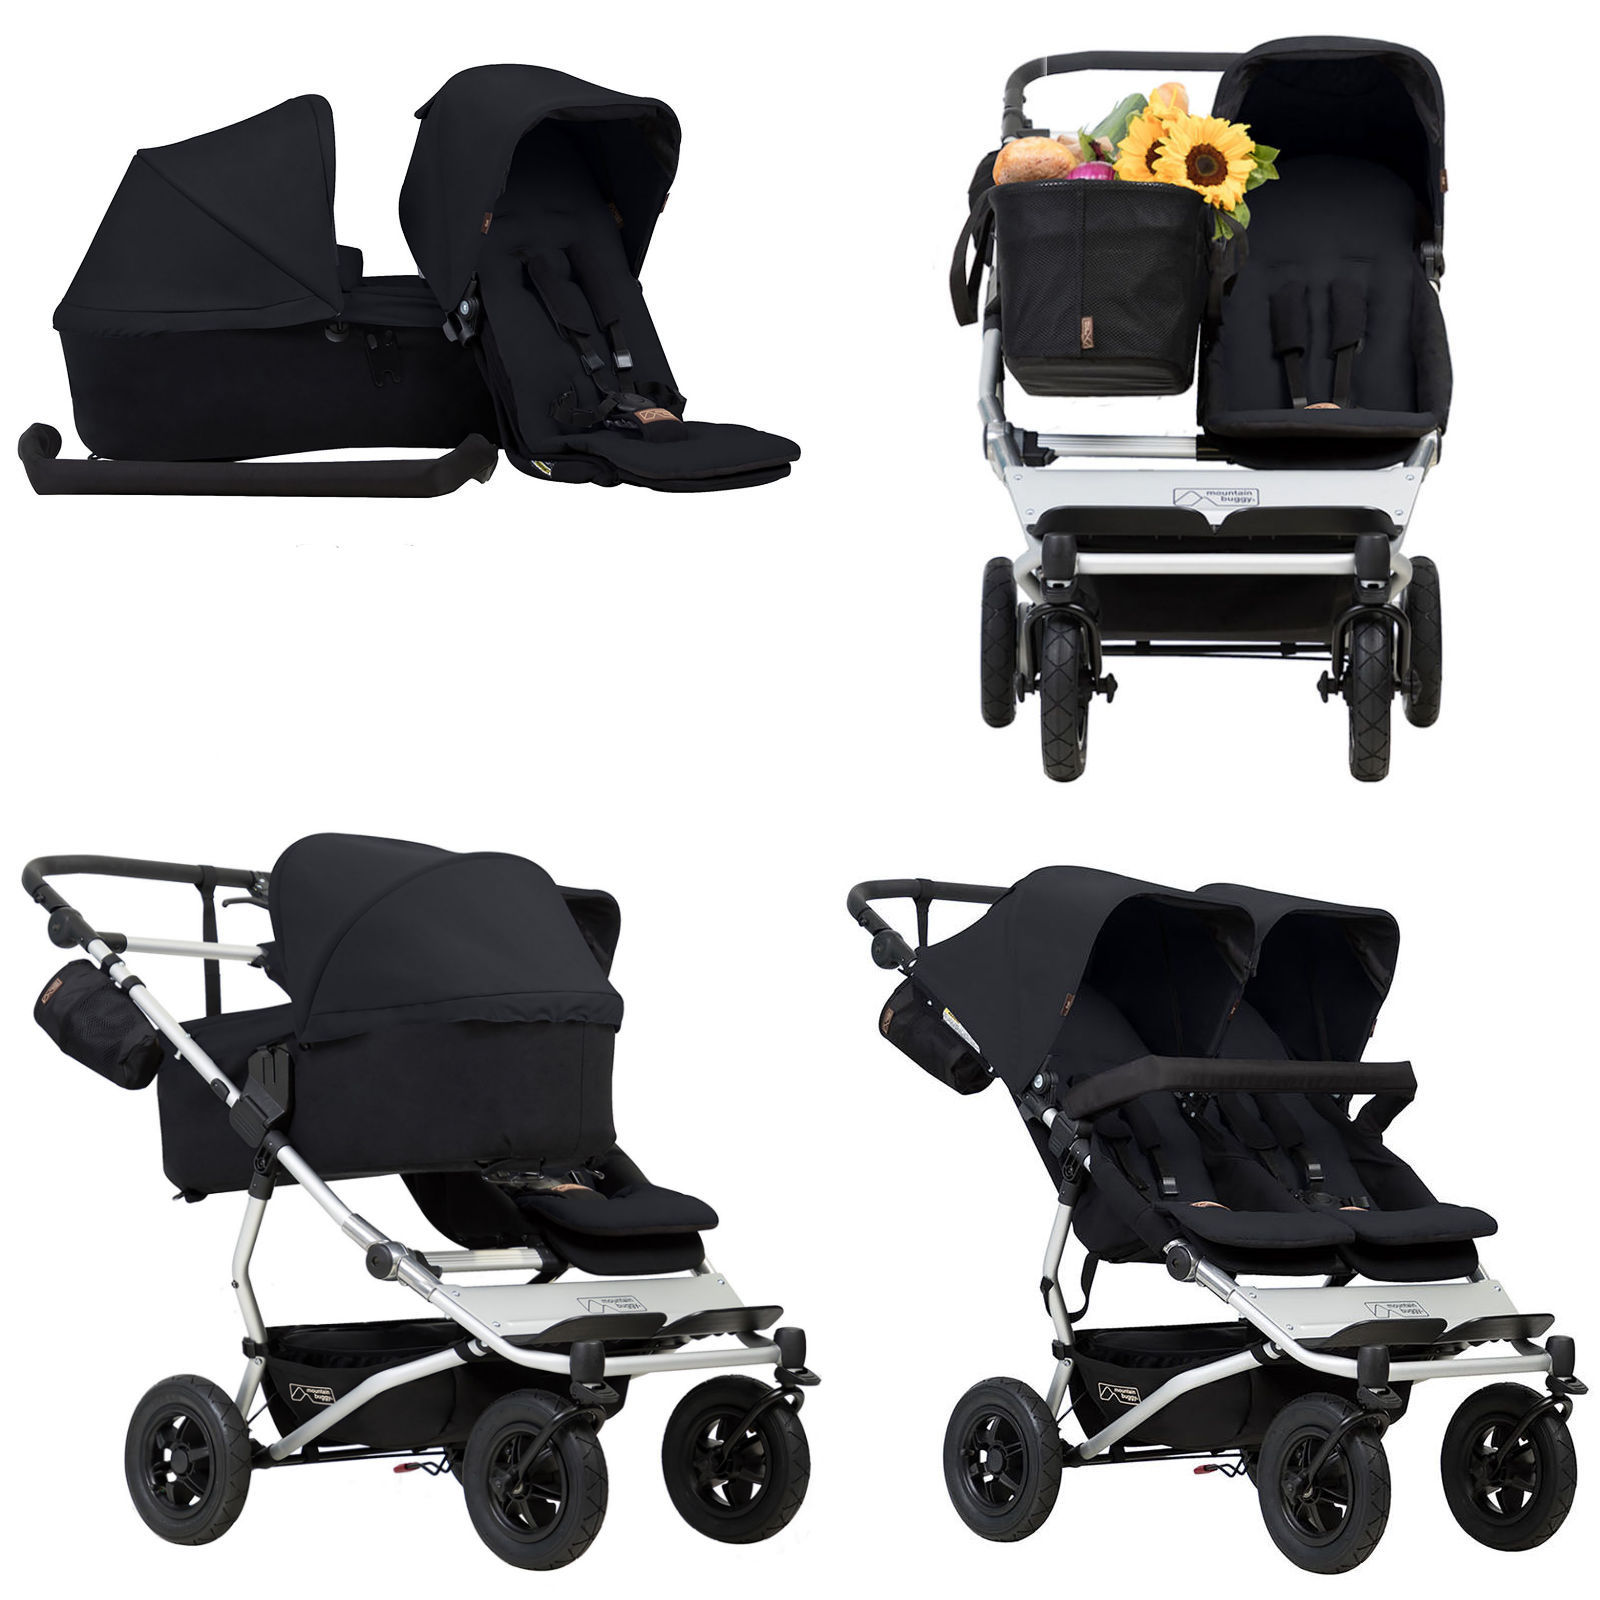 mountain buggy family pack